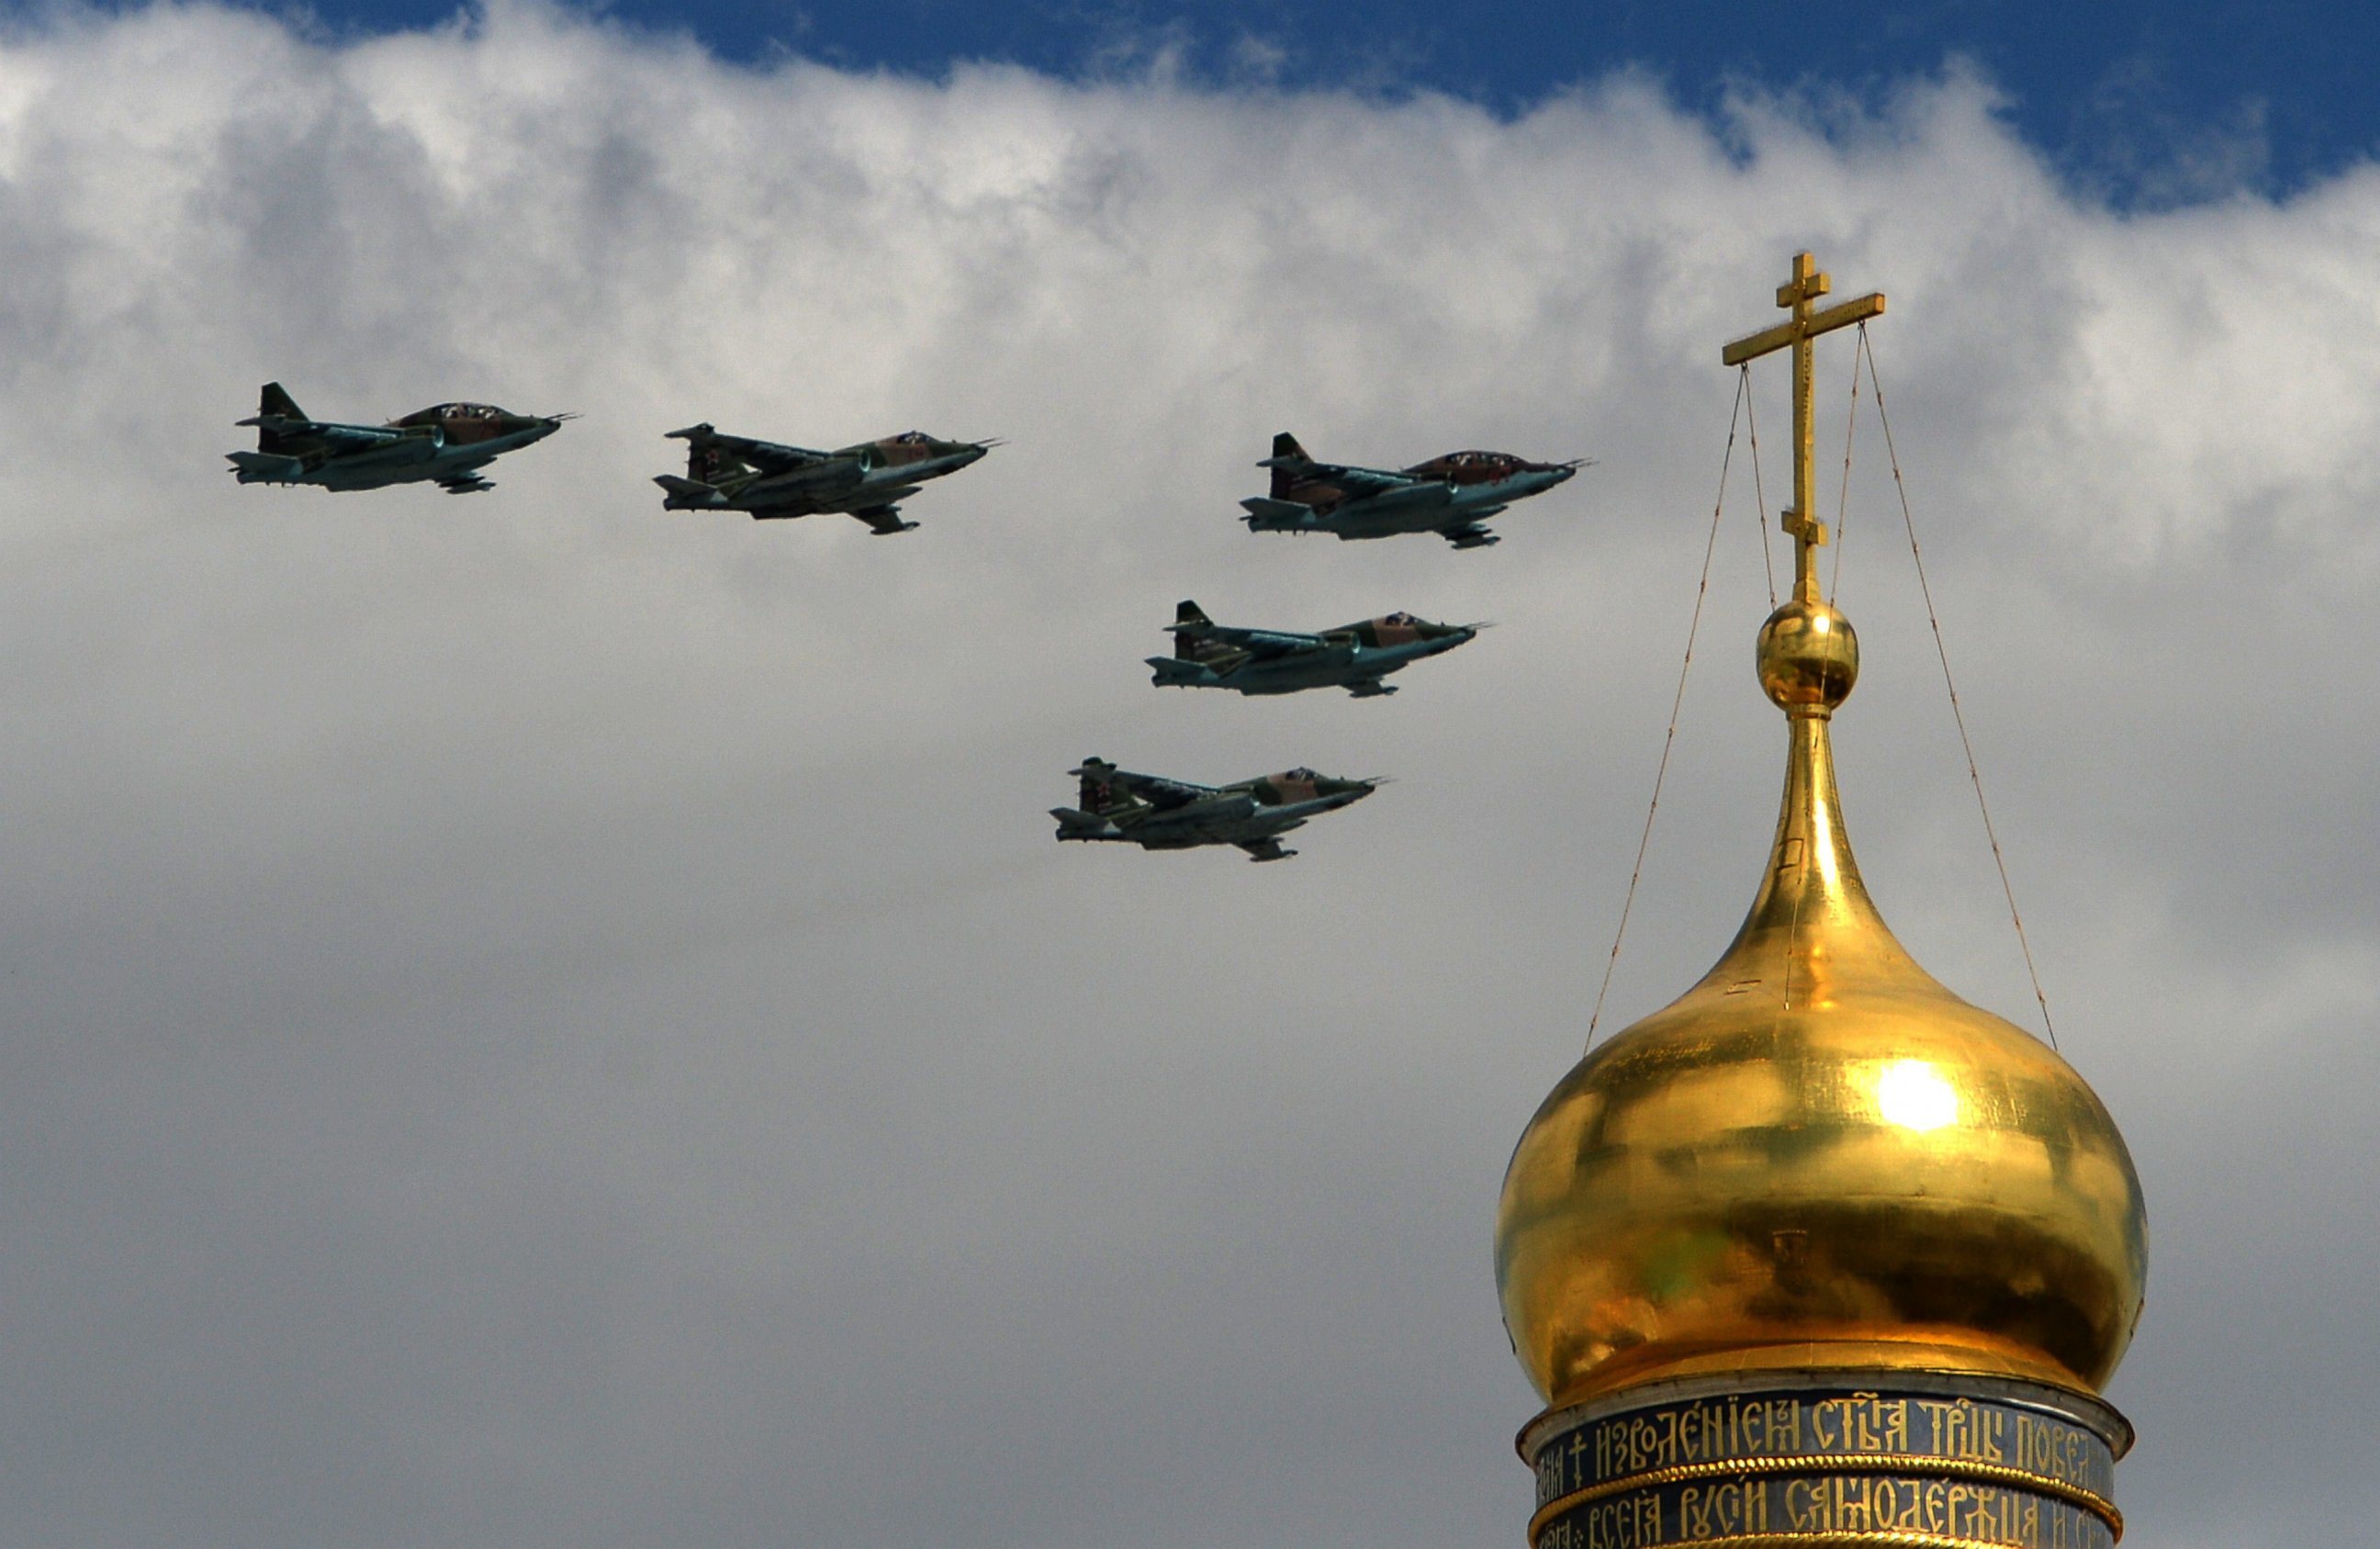 PHOTO: Russian Su-25 assault aircraft fly above the Kremlin's cathedrals in Moscow, on May 5, 2015, during a rehearsal of the Victory Day parade.